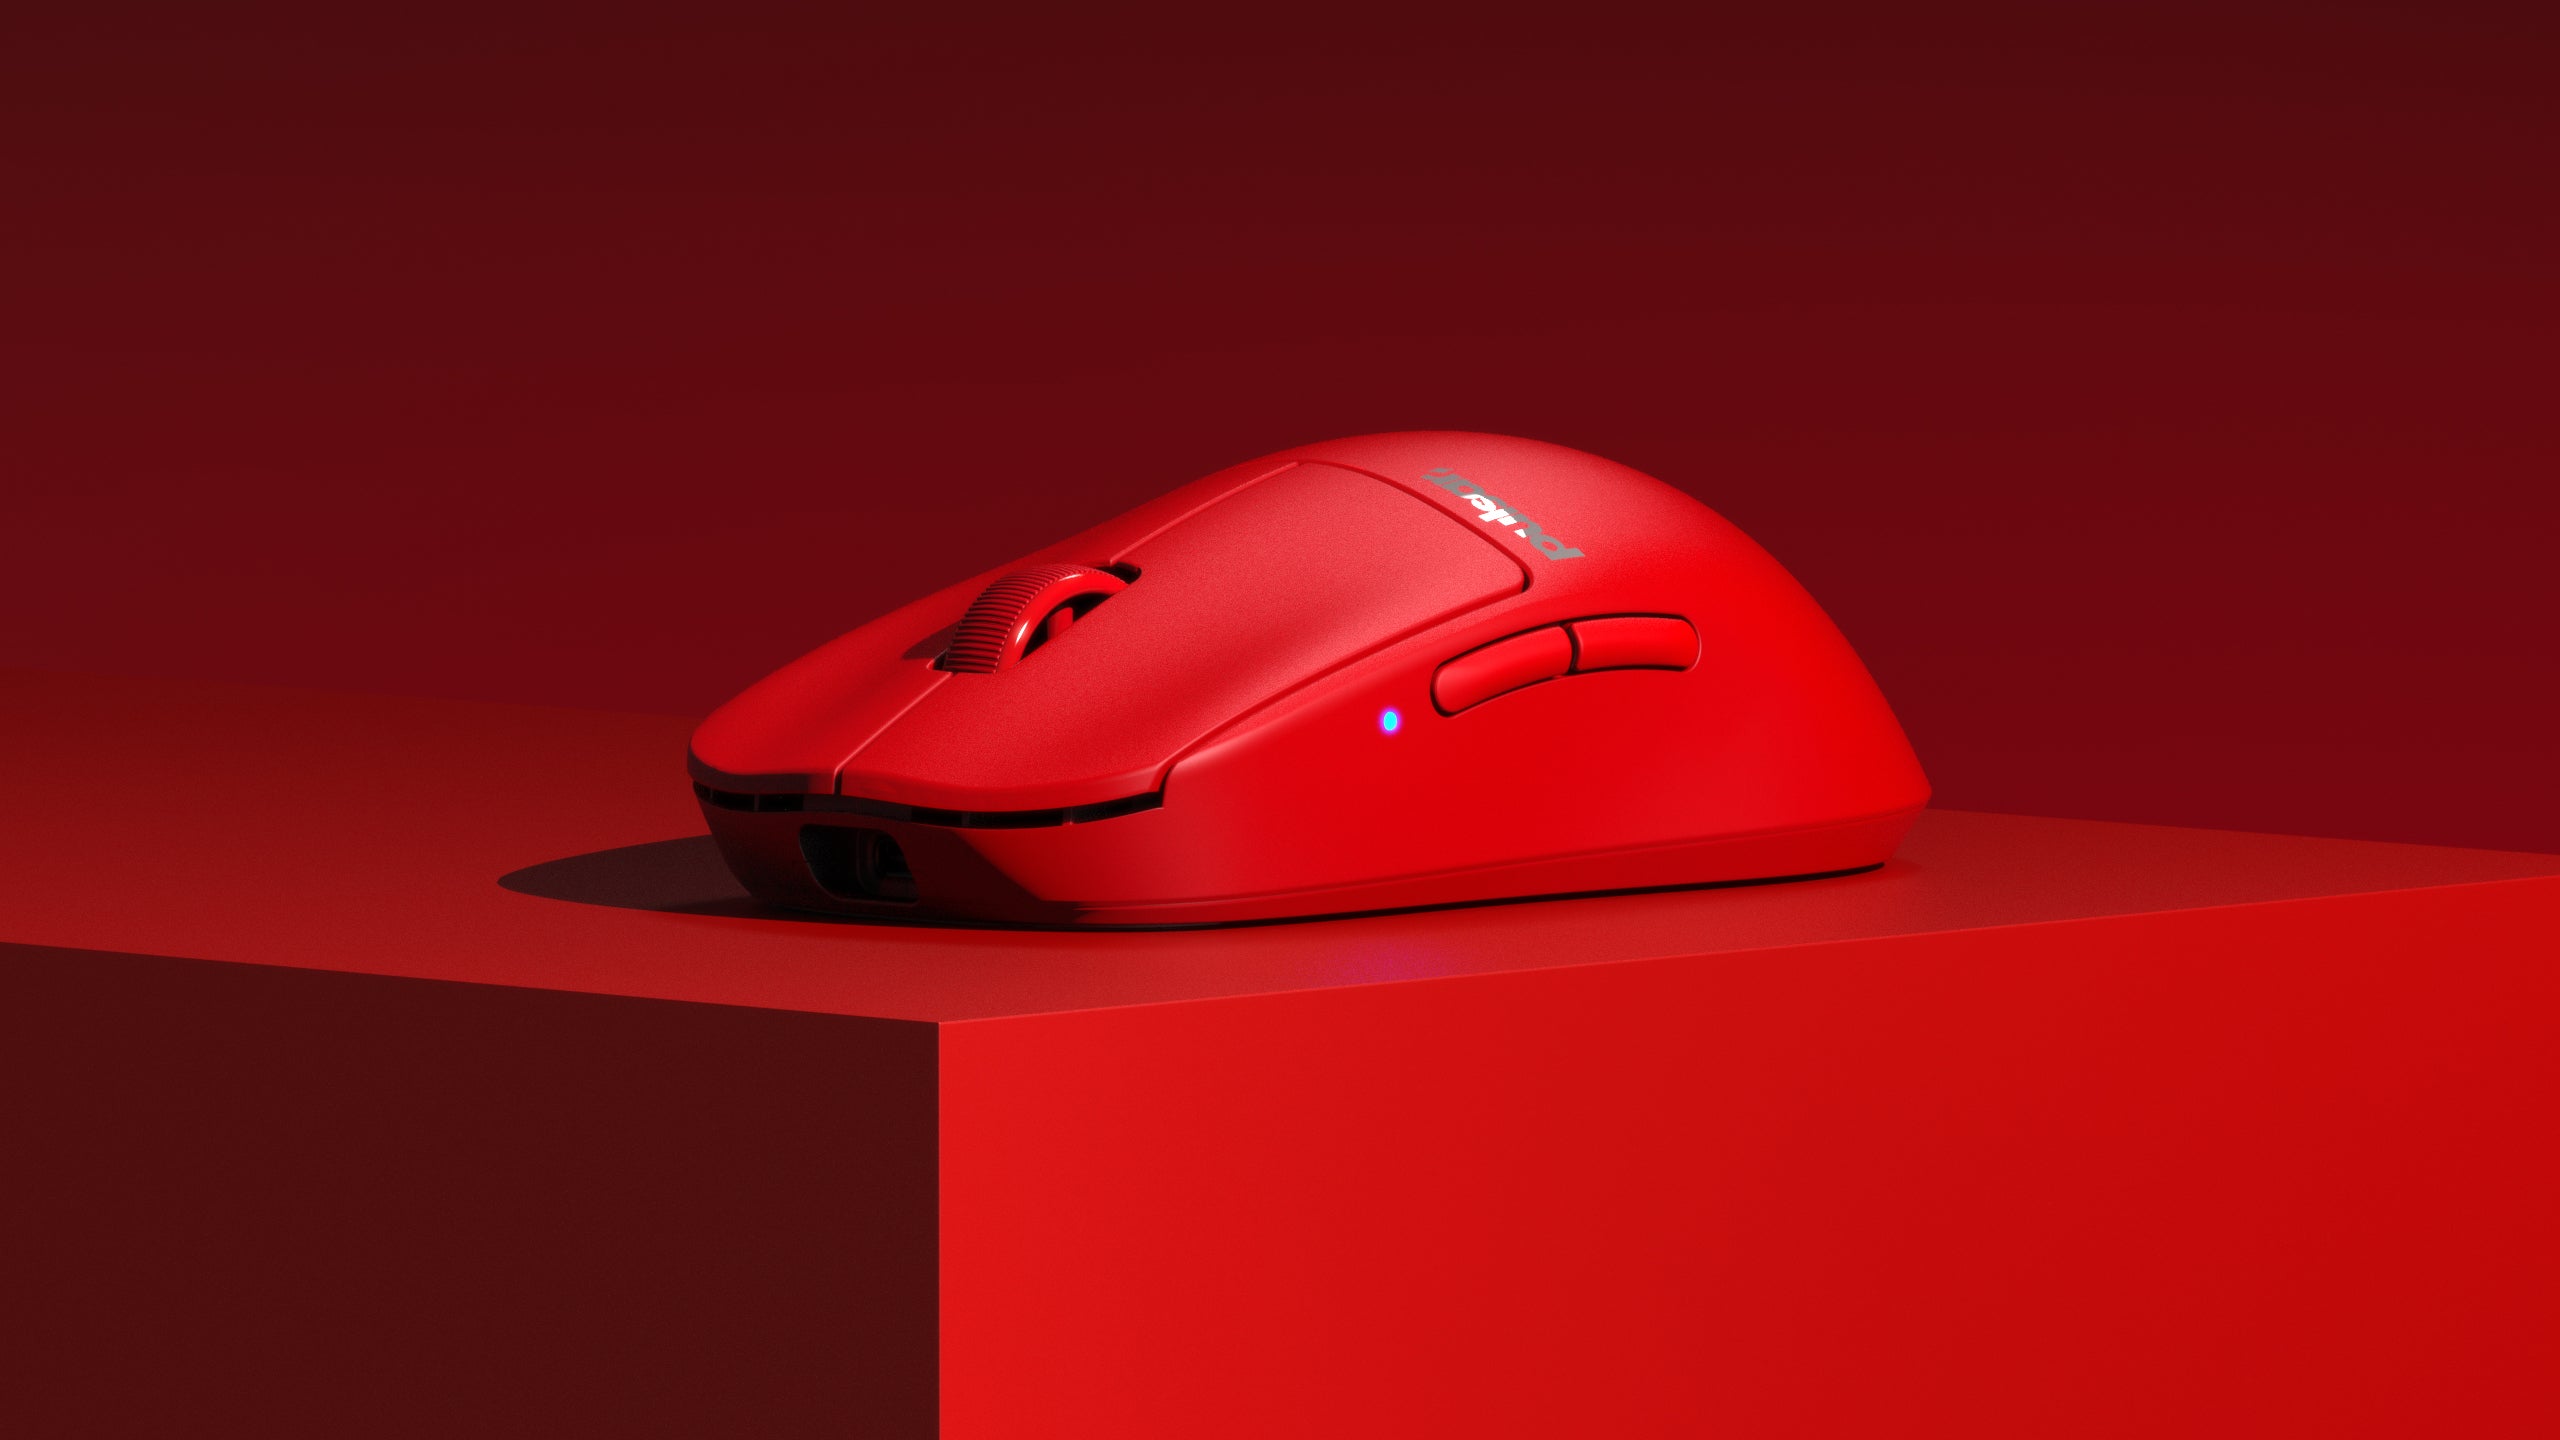 Red Edition] X2V2 Gaming Mouse – Pulsar Gaming Gears